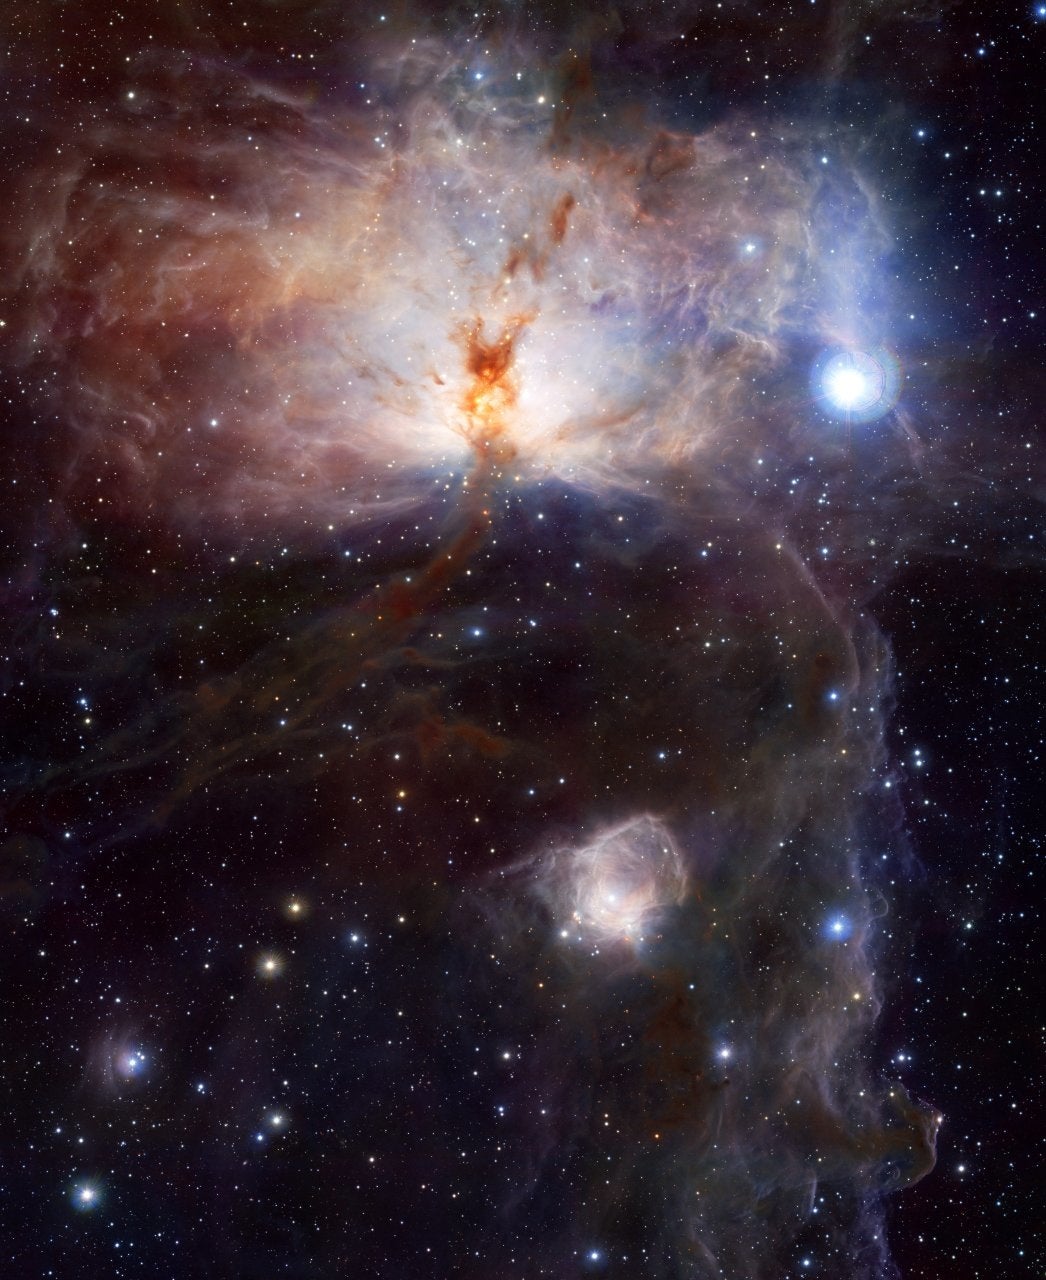 VISTA's first image shows the Flame Nebula (NGC 2024), a spectacular star-forming cloud of gas and dust in the constellation Orion. In visible light, the flame is hidden behind thick clouds of dust, but infrared wavelengths reveal the cluster of hot young stars within.